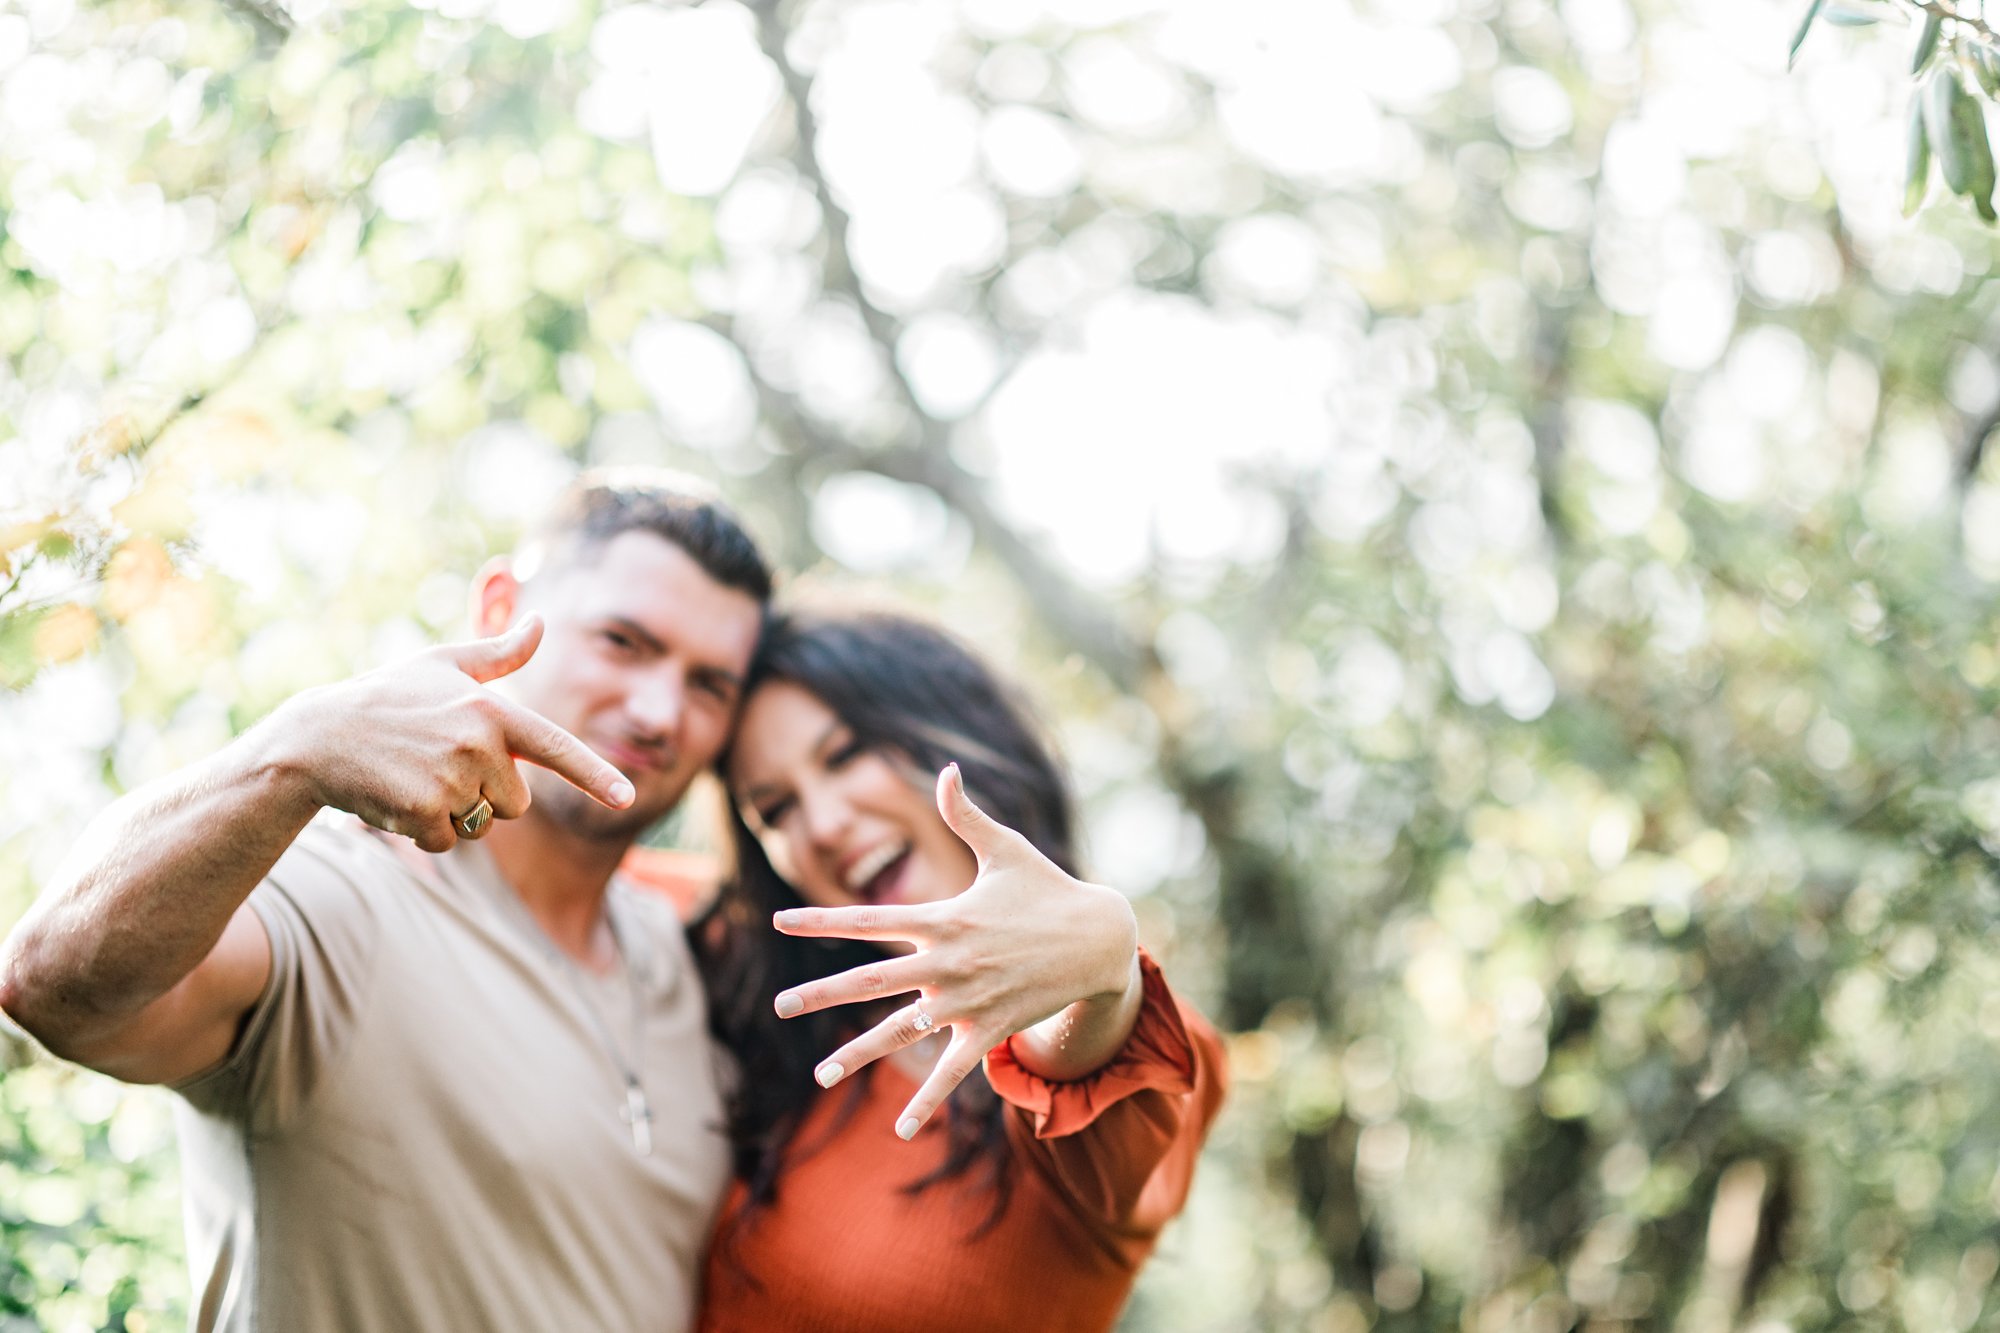 craggy gardens engagement session-17.jpg